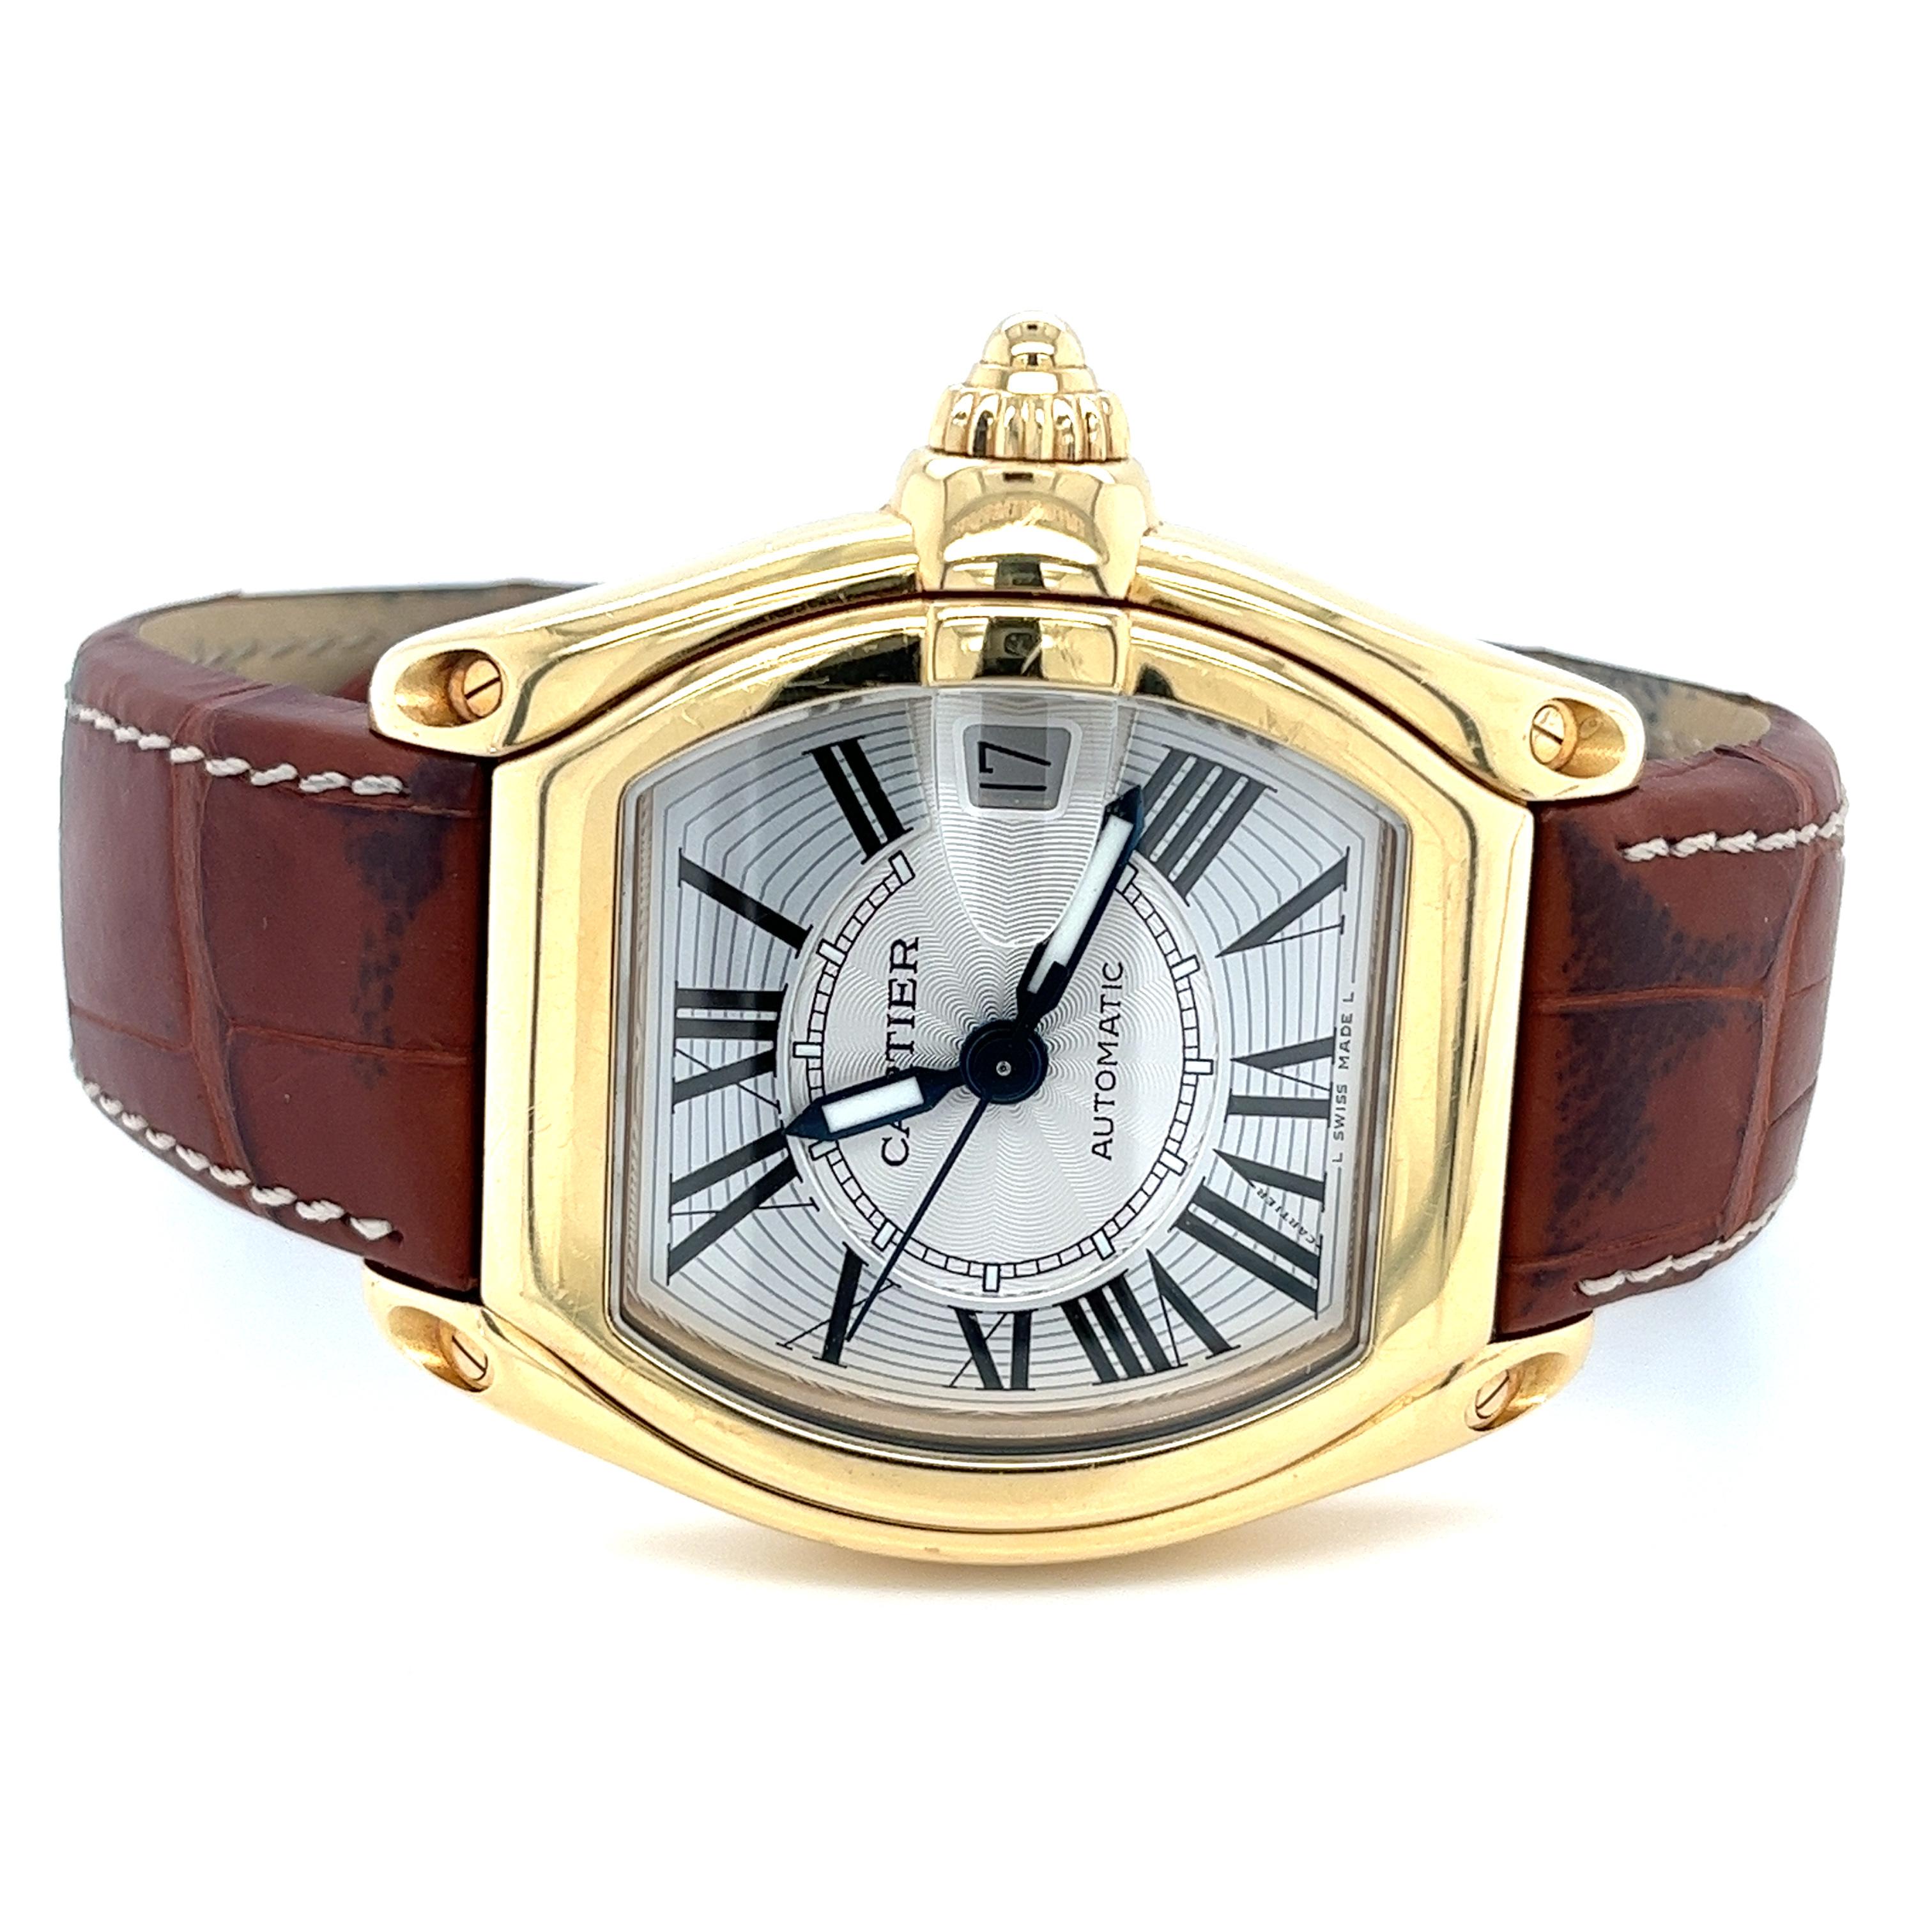 Art Deco Cartier Roadster 2524 Men's Watch in 18K Gold with Leather Strap Box and Papers